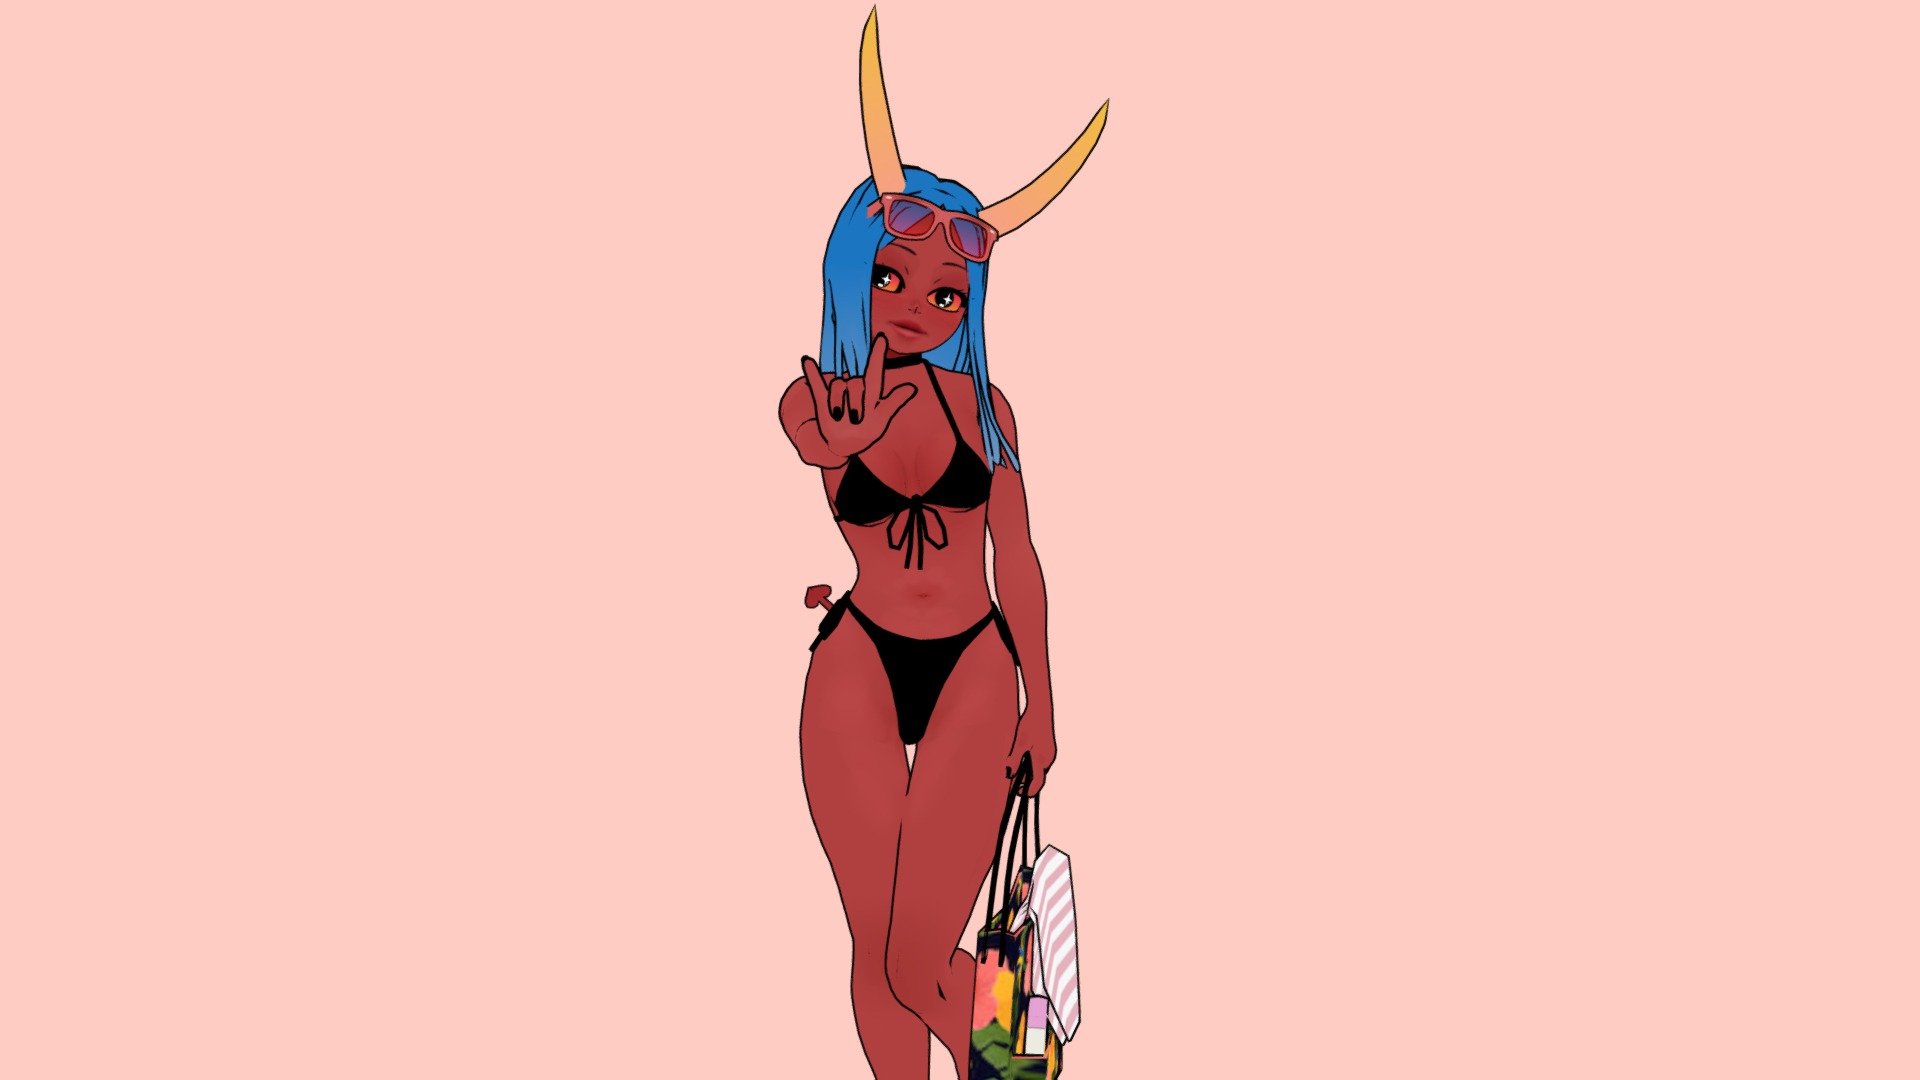 she's back and better :)

all free, but if you like it, any donations is very much appreciated :) https://ko-fi.com/jesusaponza :) &lt;3

i believe in my skills so trying my best to go somewhere, so i really appreciate any support - demon girl demi going to the beach - Download Free 3D model by Jesus aponza (@Jesusaponza) 3d model